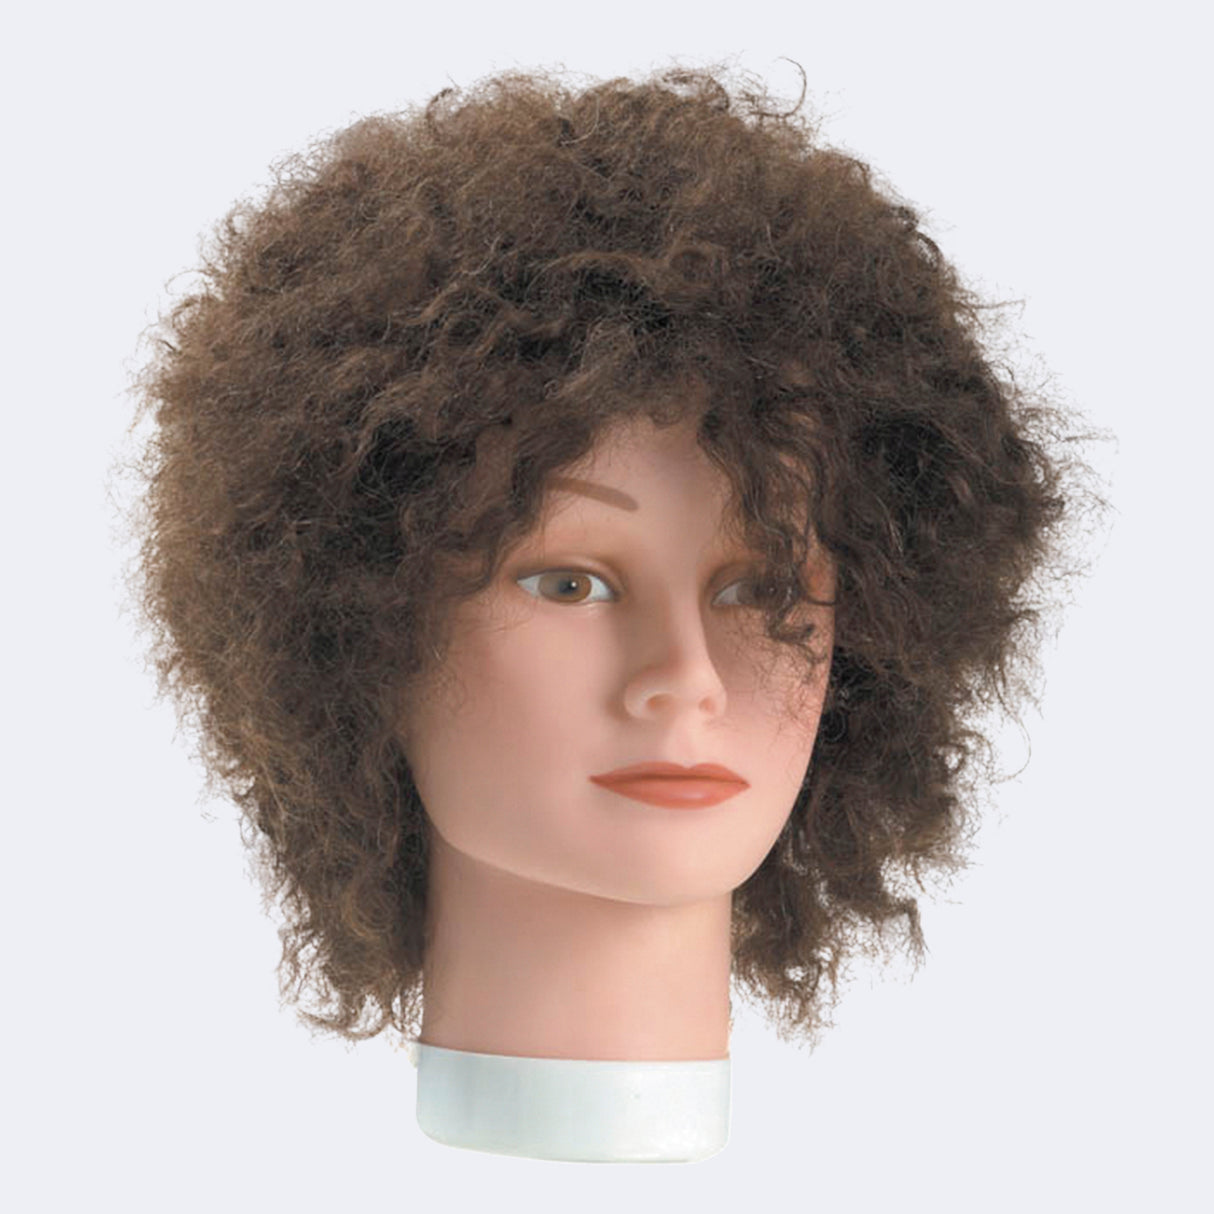 BabylissPro Mannequin with Frizzy Hair